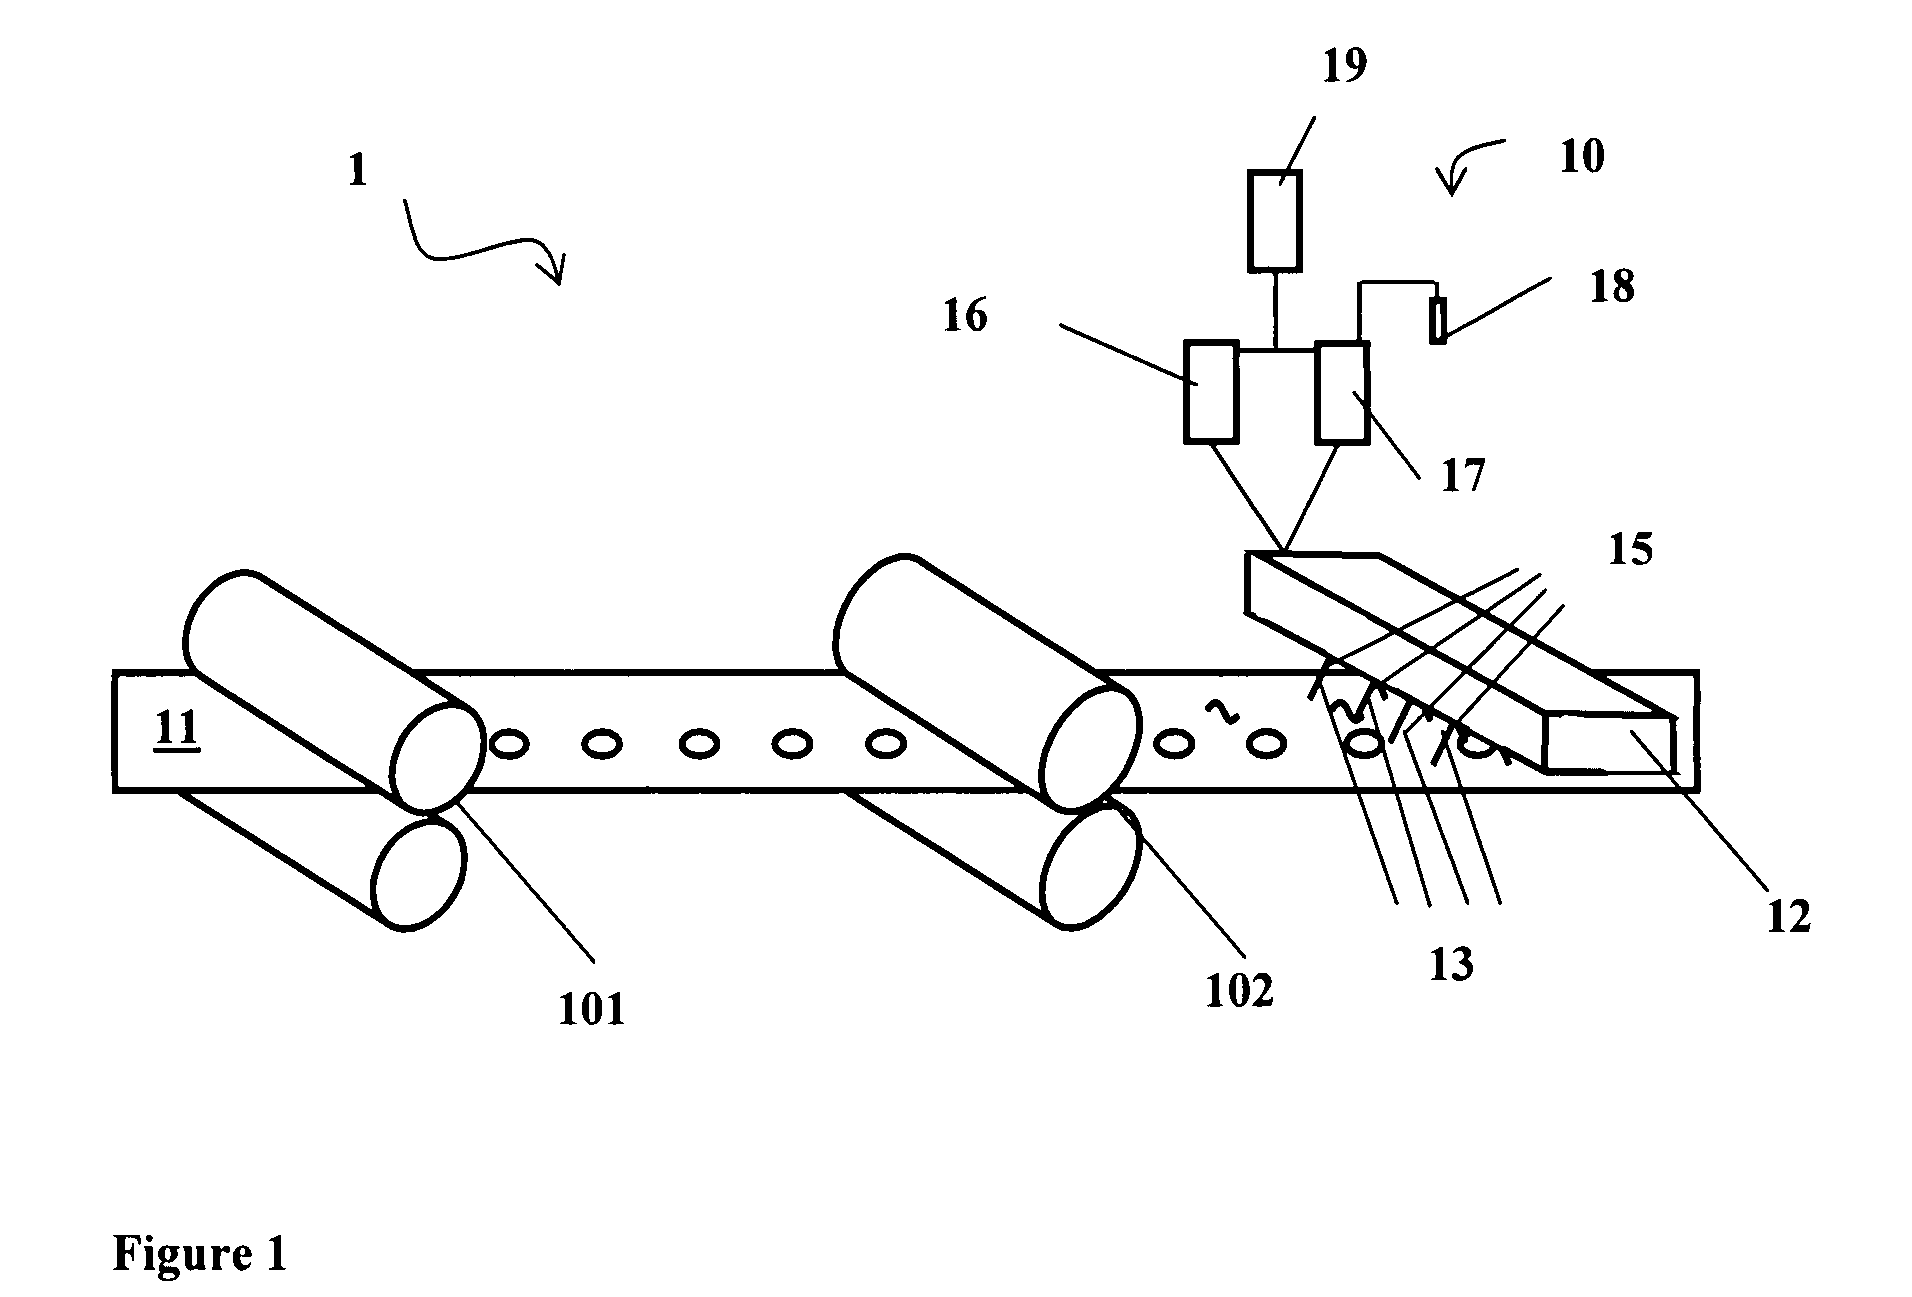 Method and apparatus for identifying repeated patterns